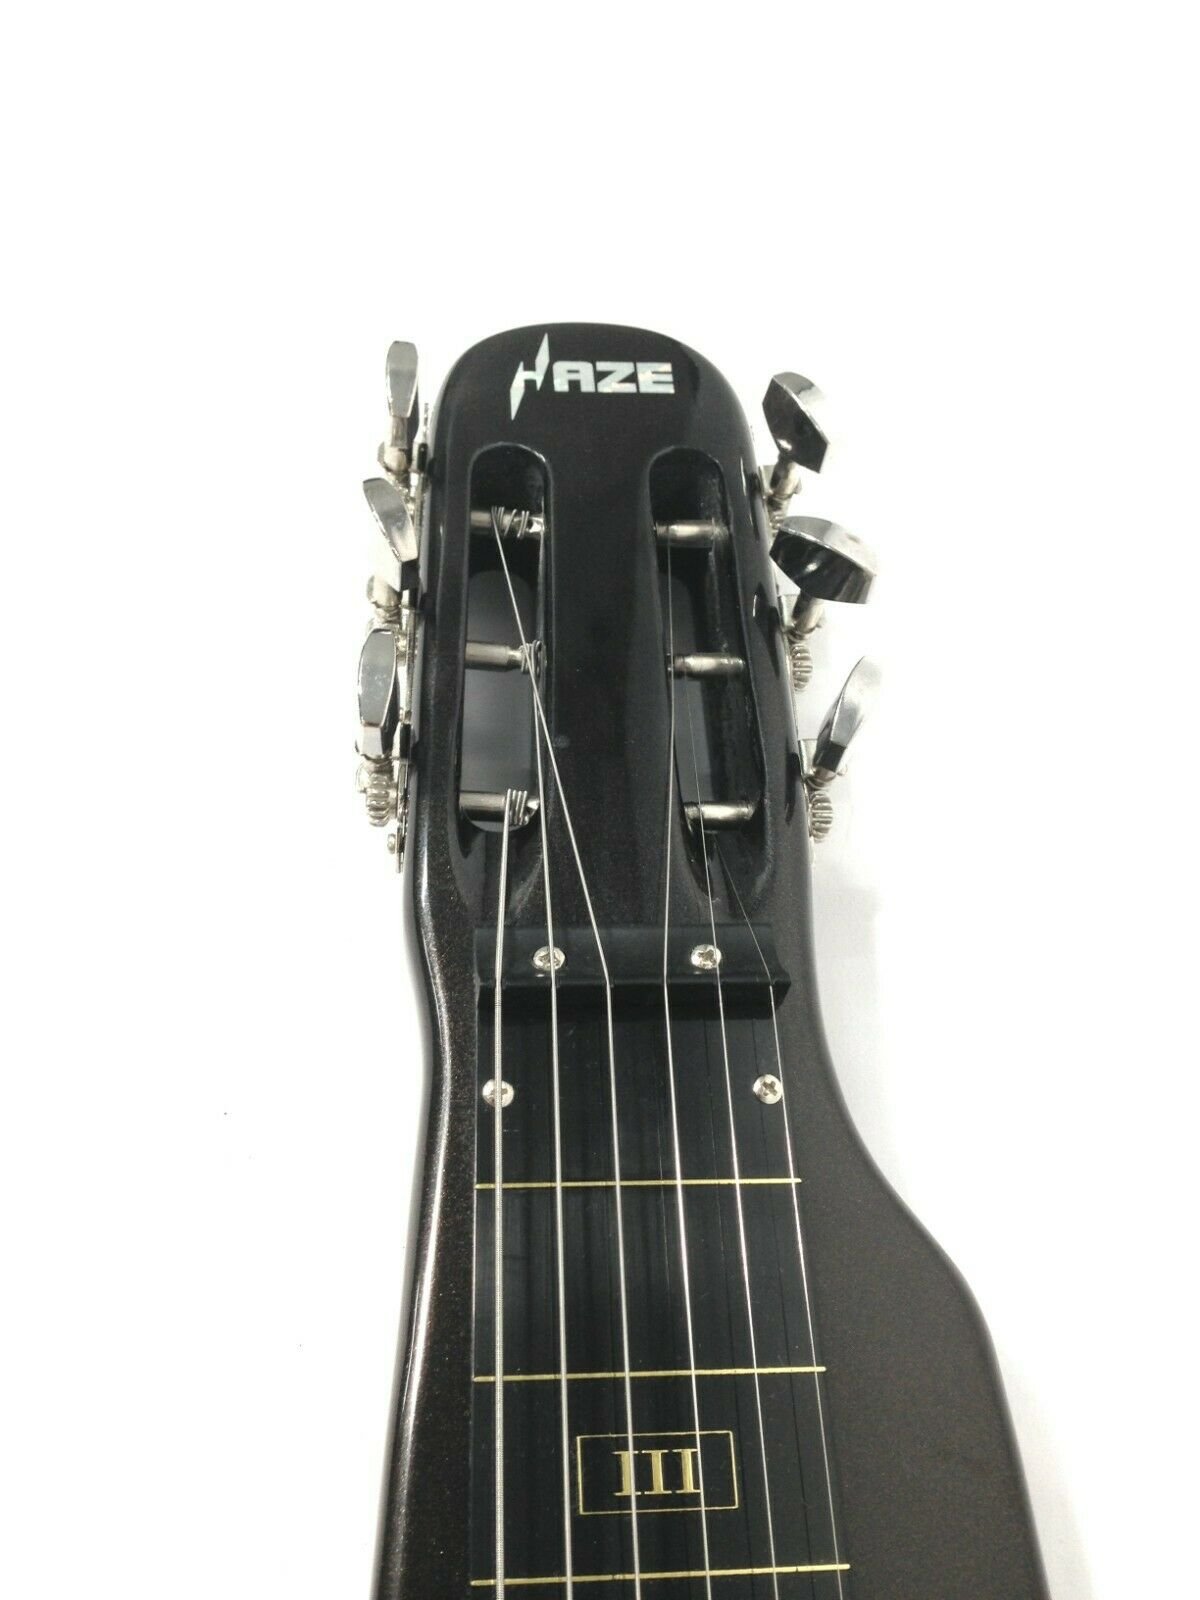 Haze HSLT1930MBK Lap steeL with stand, glass Tone Bar, tuner, extra string and picks